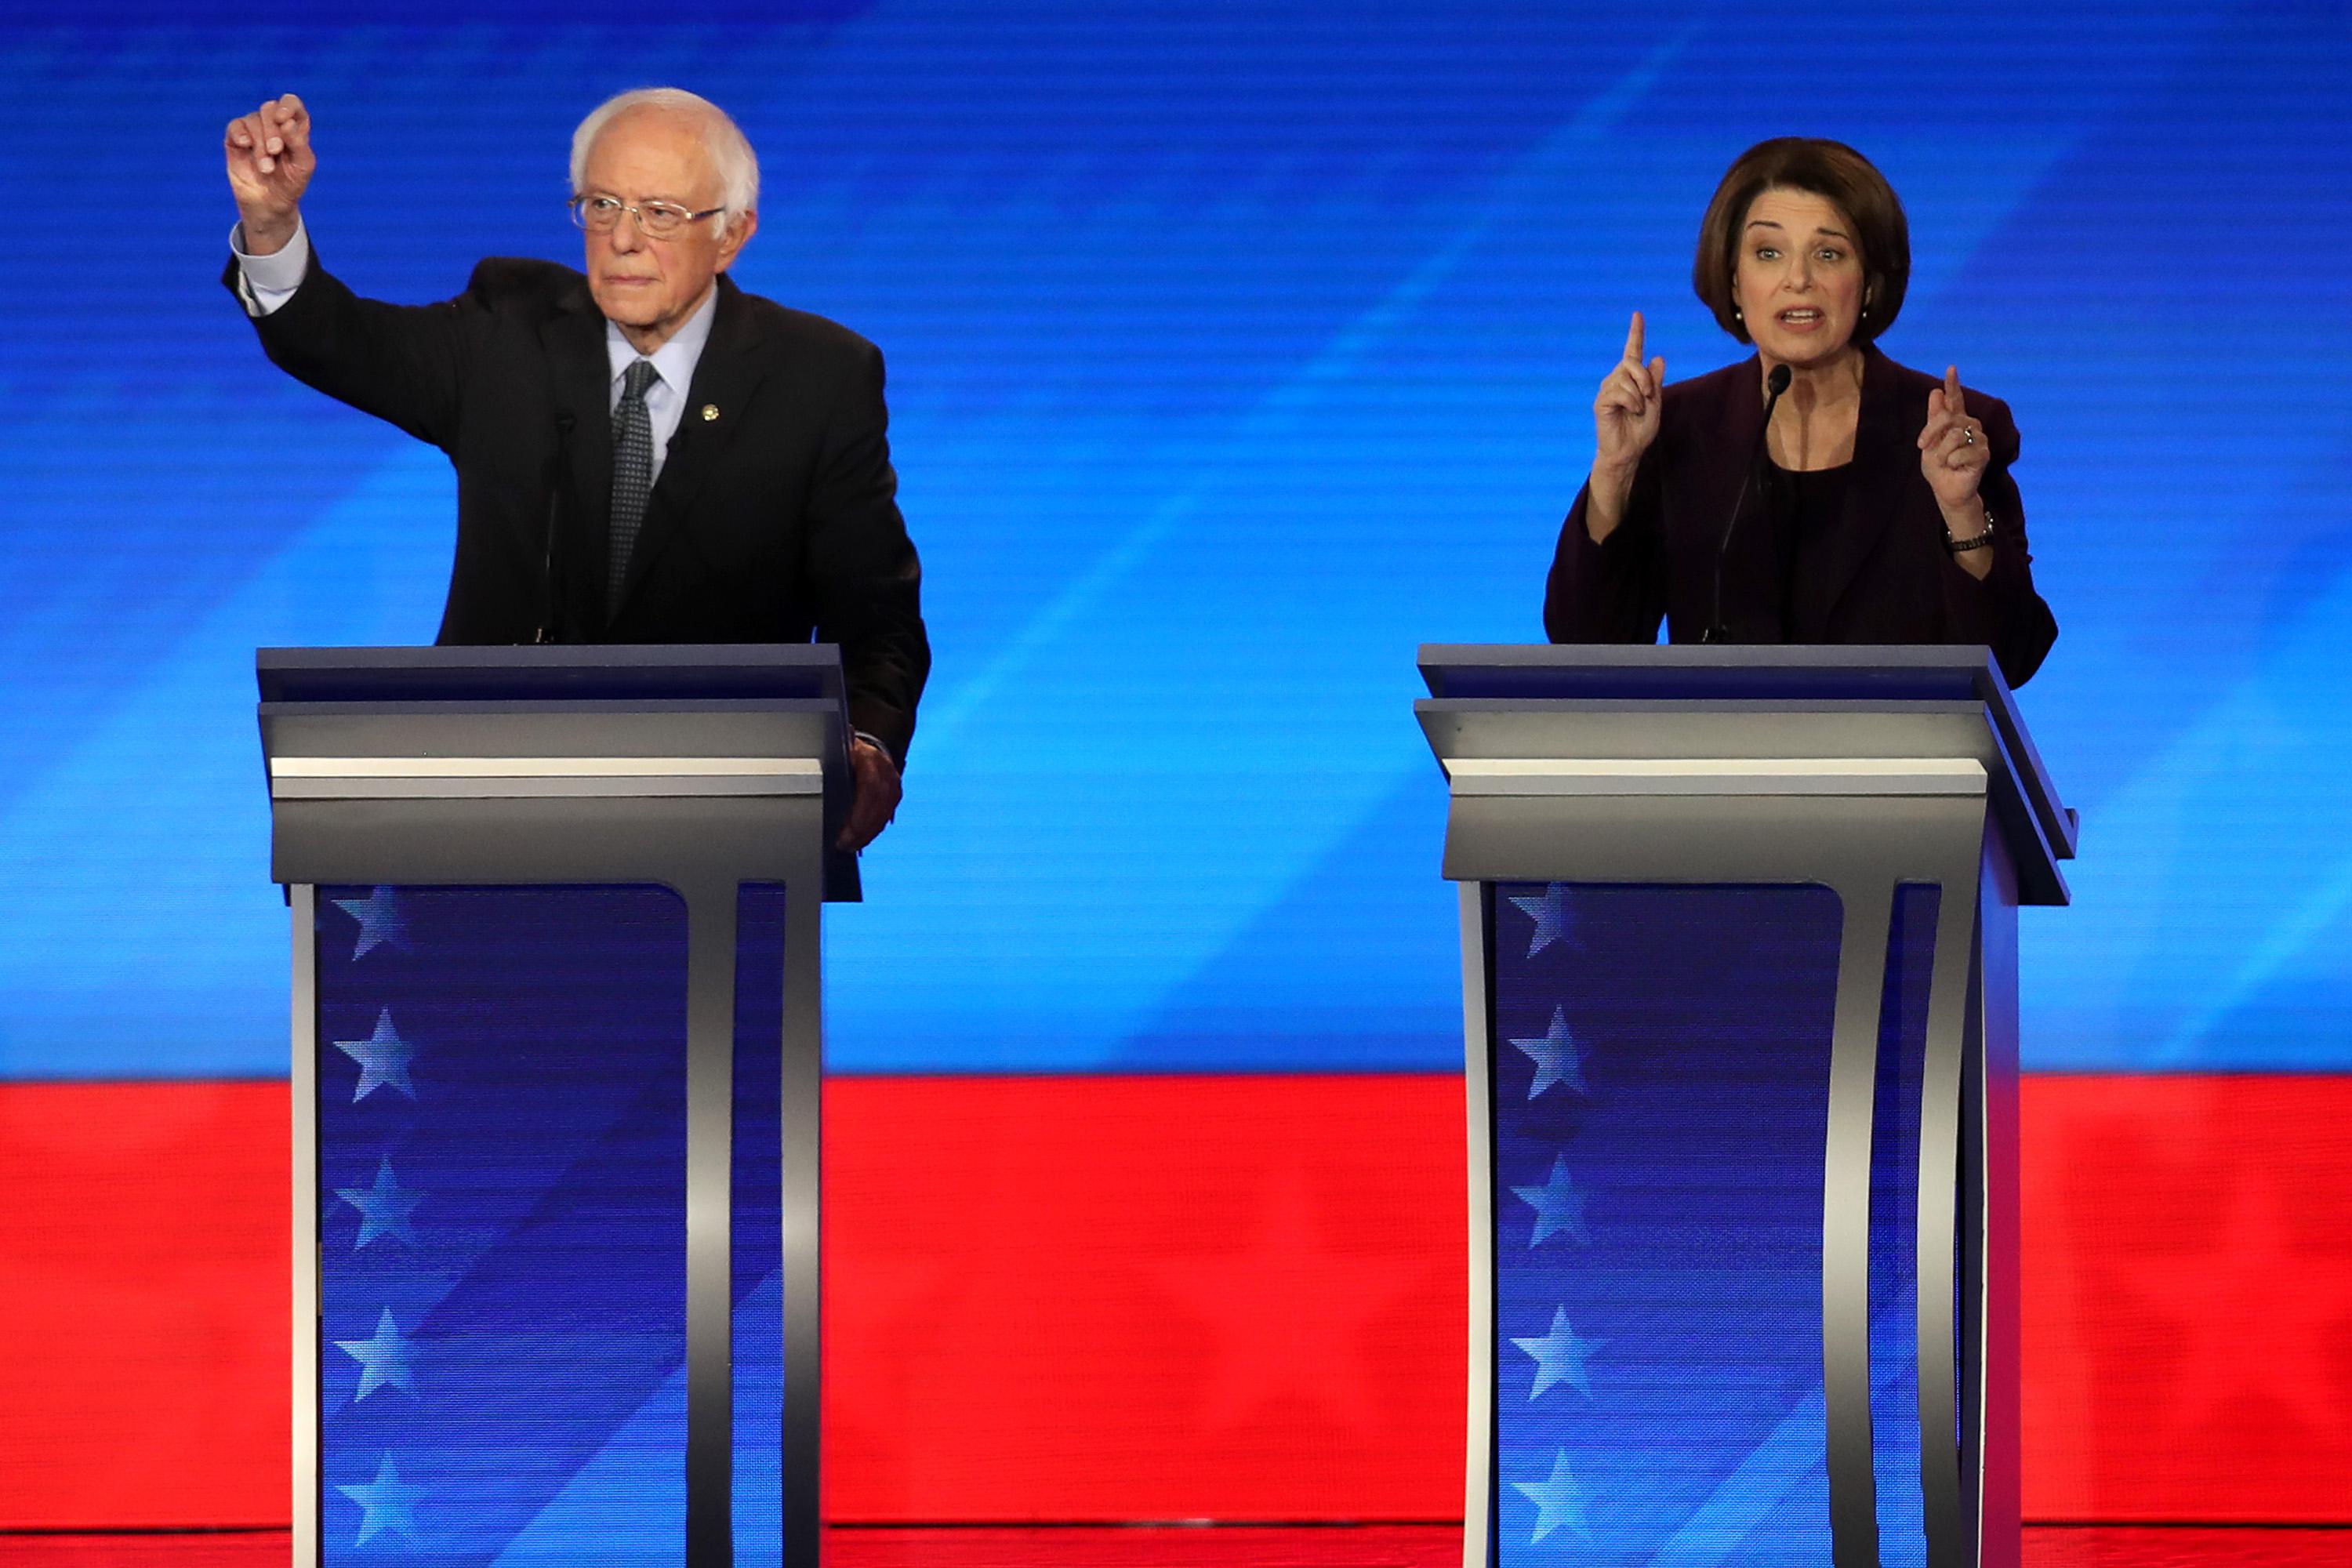 Bernie Sanders and Amy Klobuchar stand at their respective podiums while gesturing with their hands.